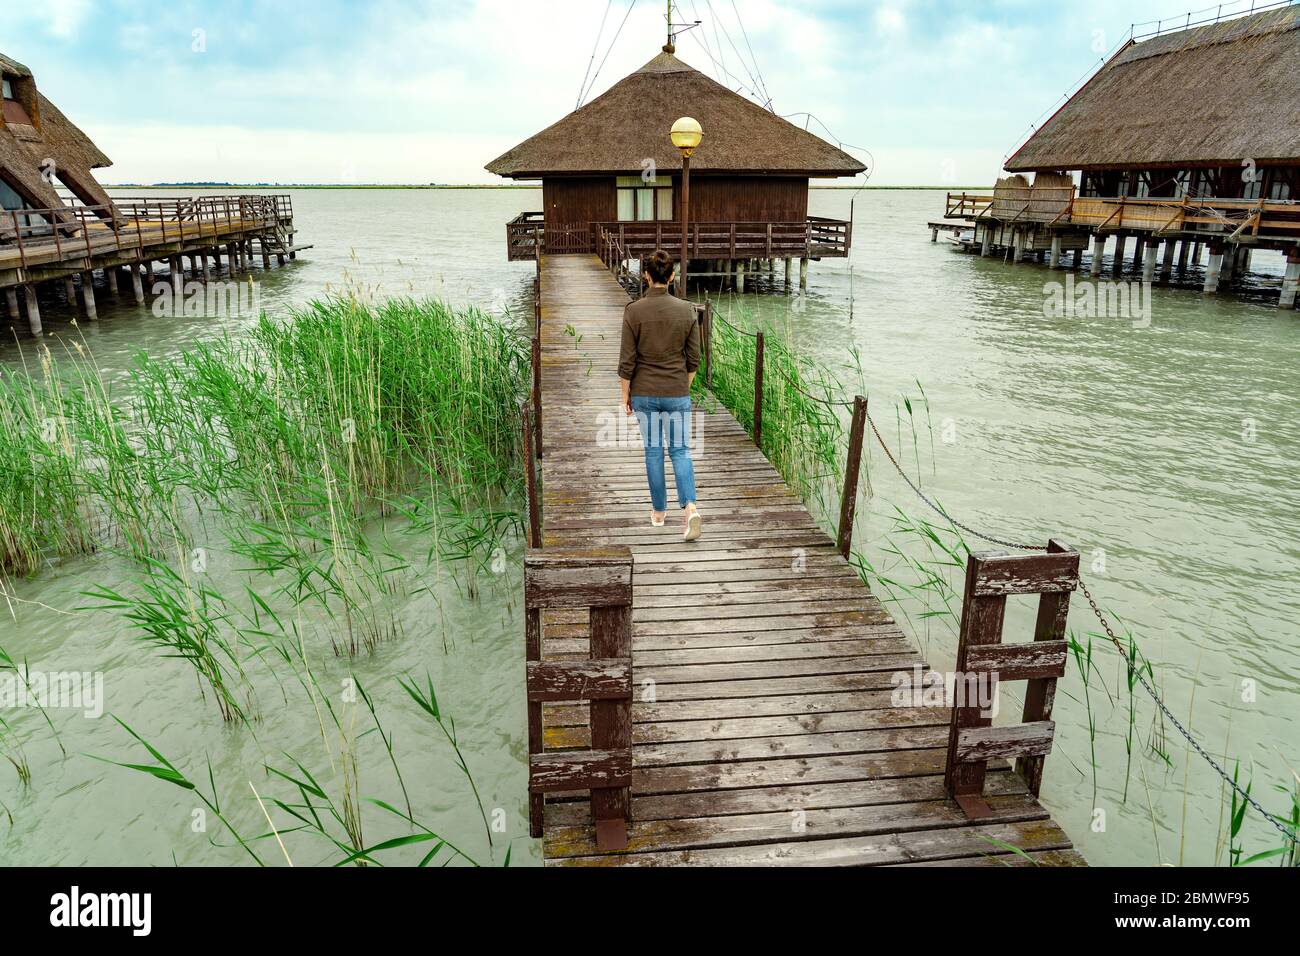 peaceful nature at the Lake Fertő in Hungary with wooden pier bungalows cabins on the lake and straw in the water with a tourist woman walking on the Stock Photo